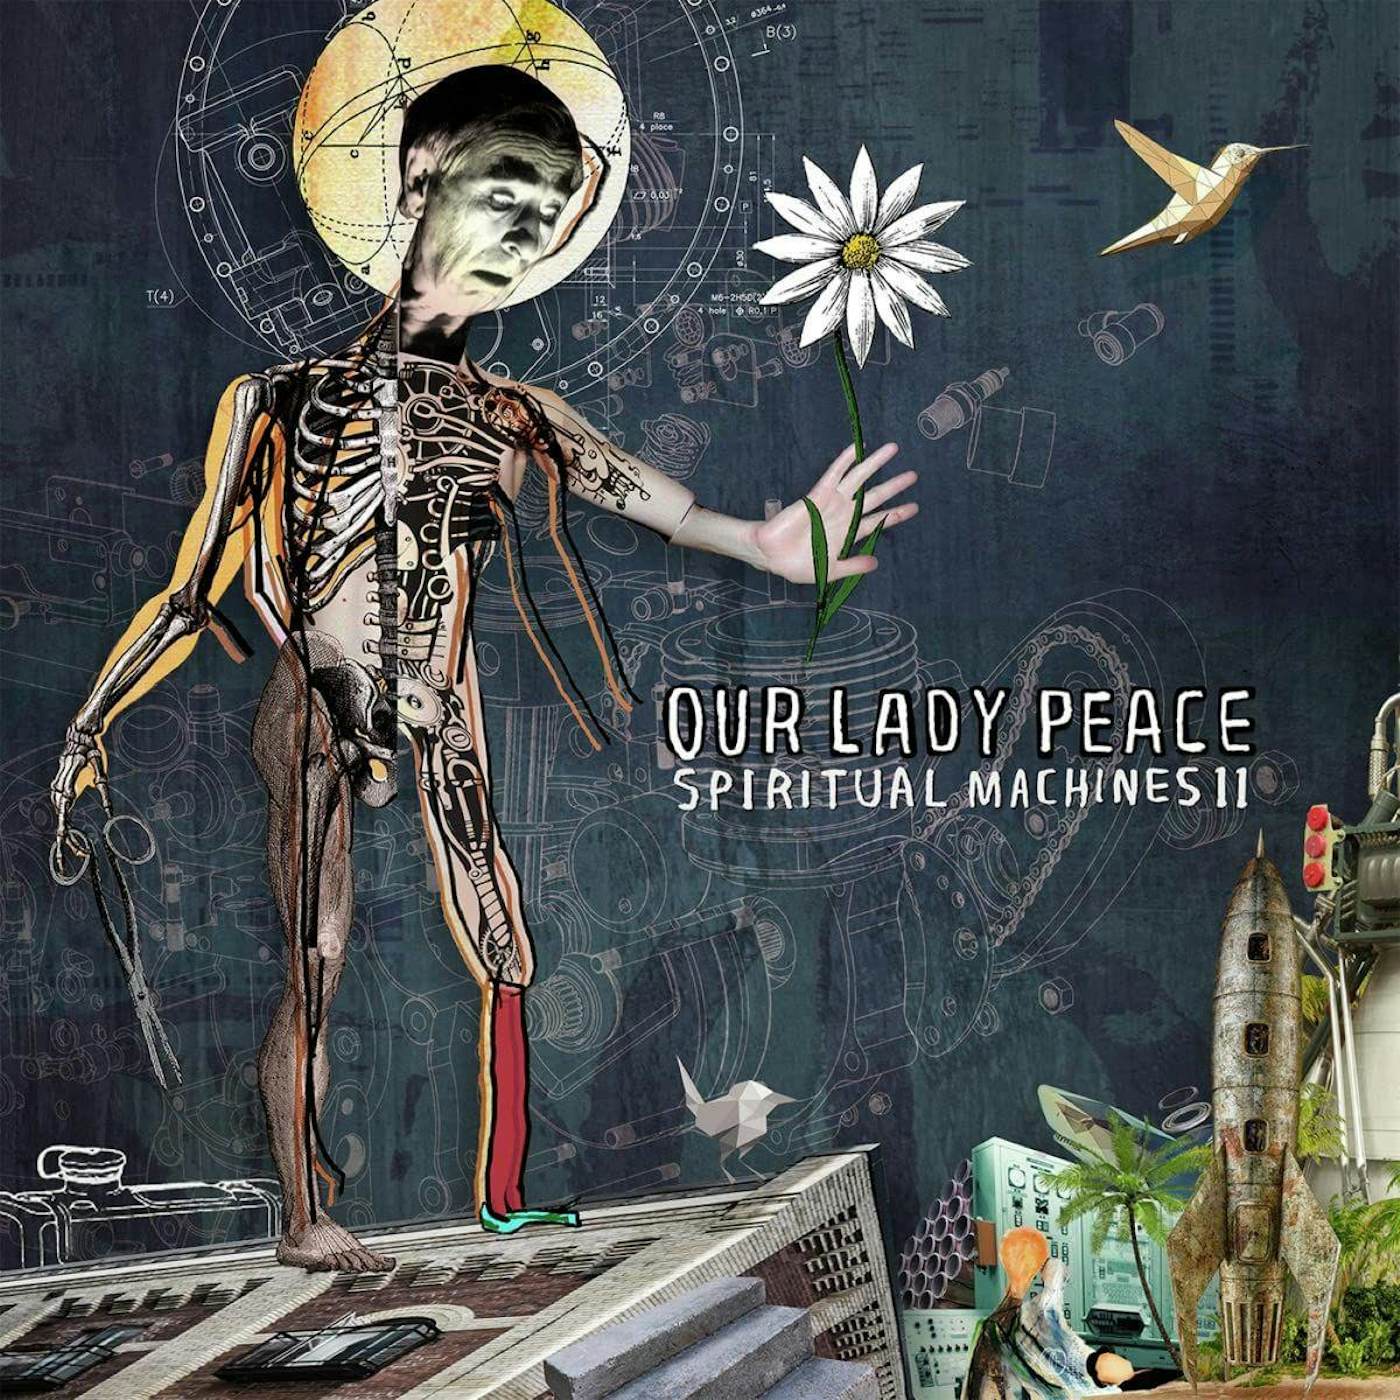 Our Lady Peace Spiritual Machines II Colored Vinyl Record